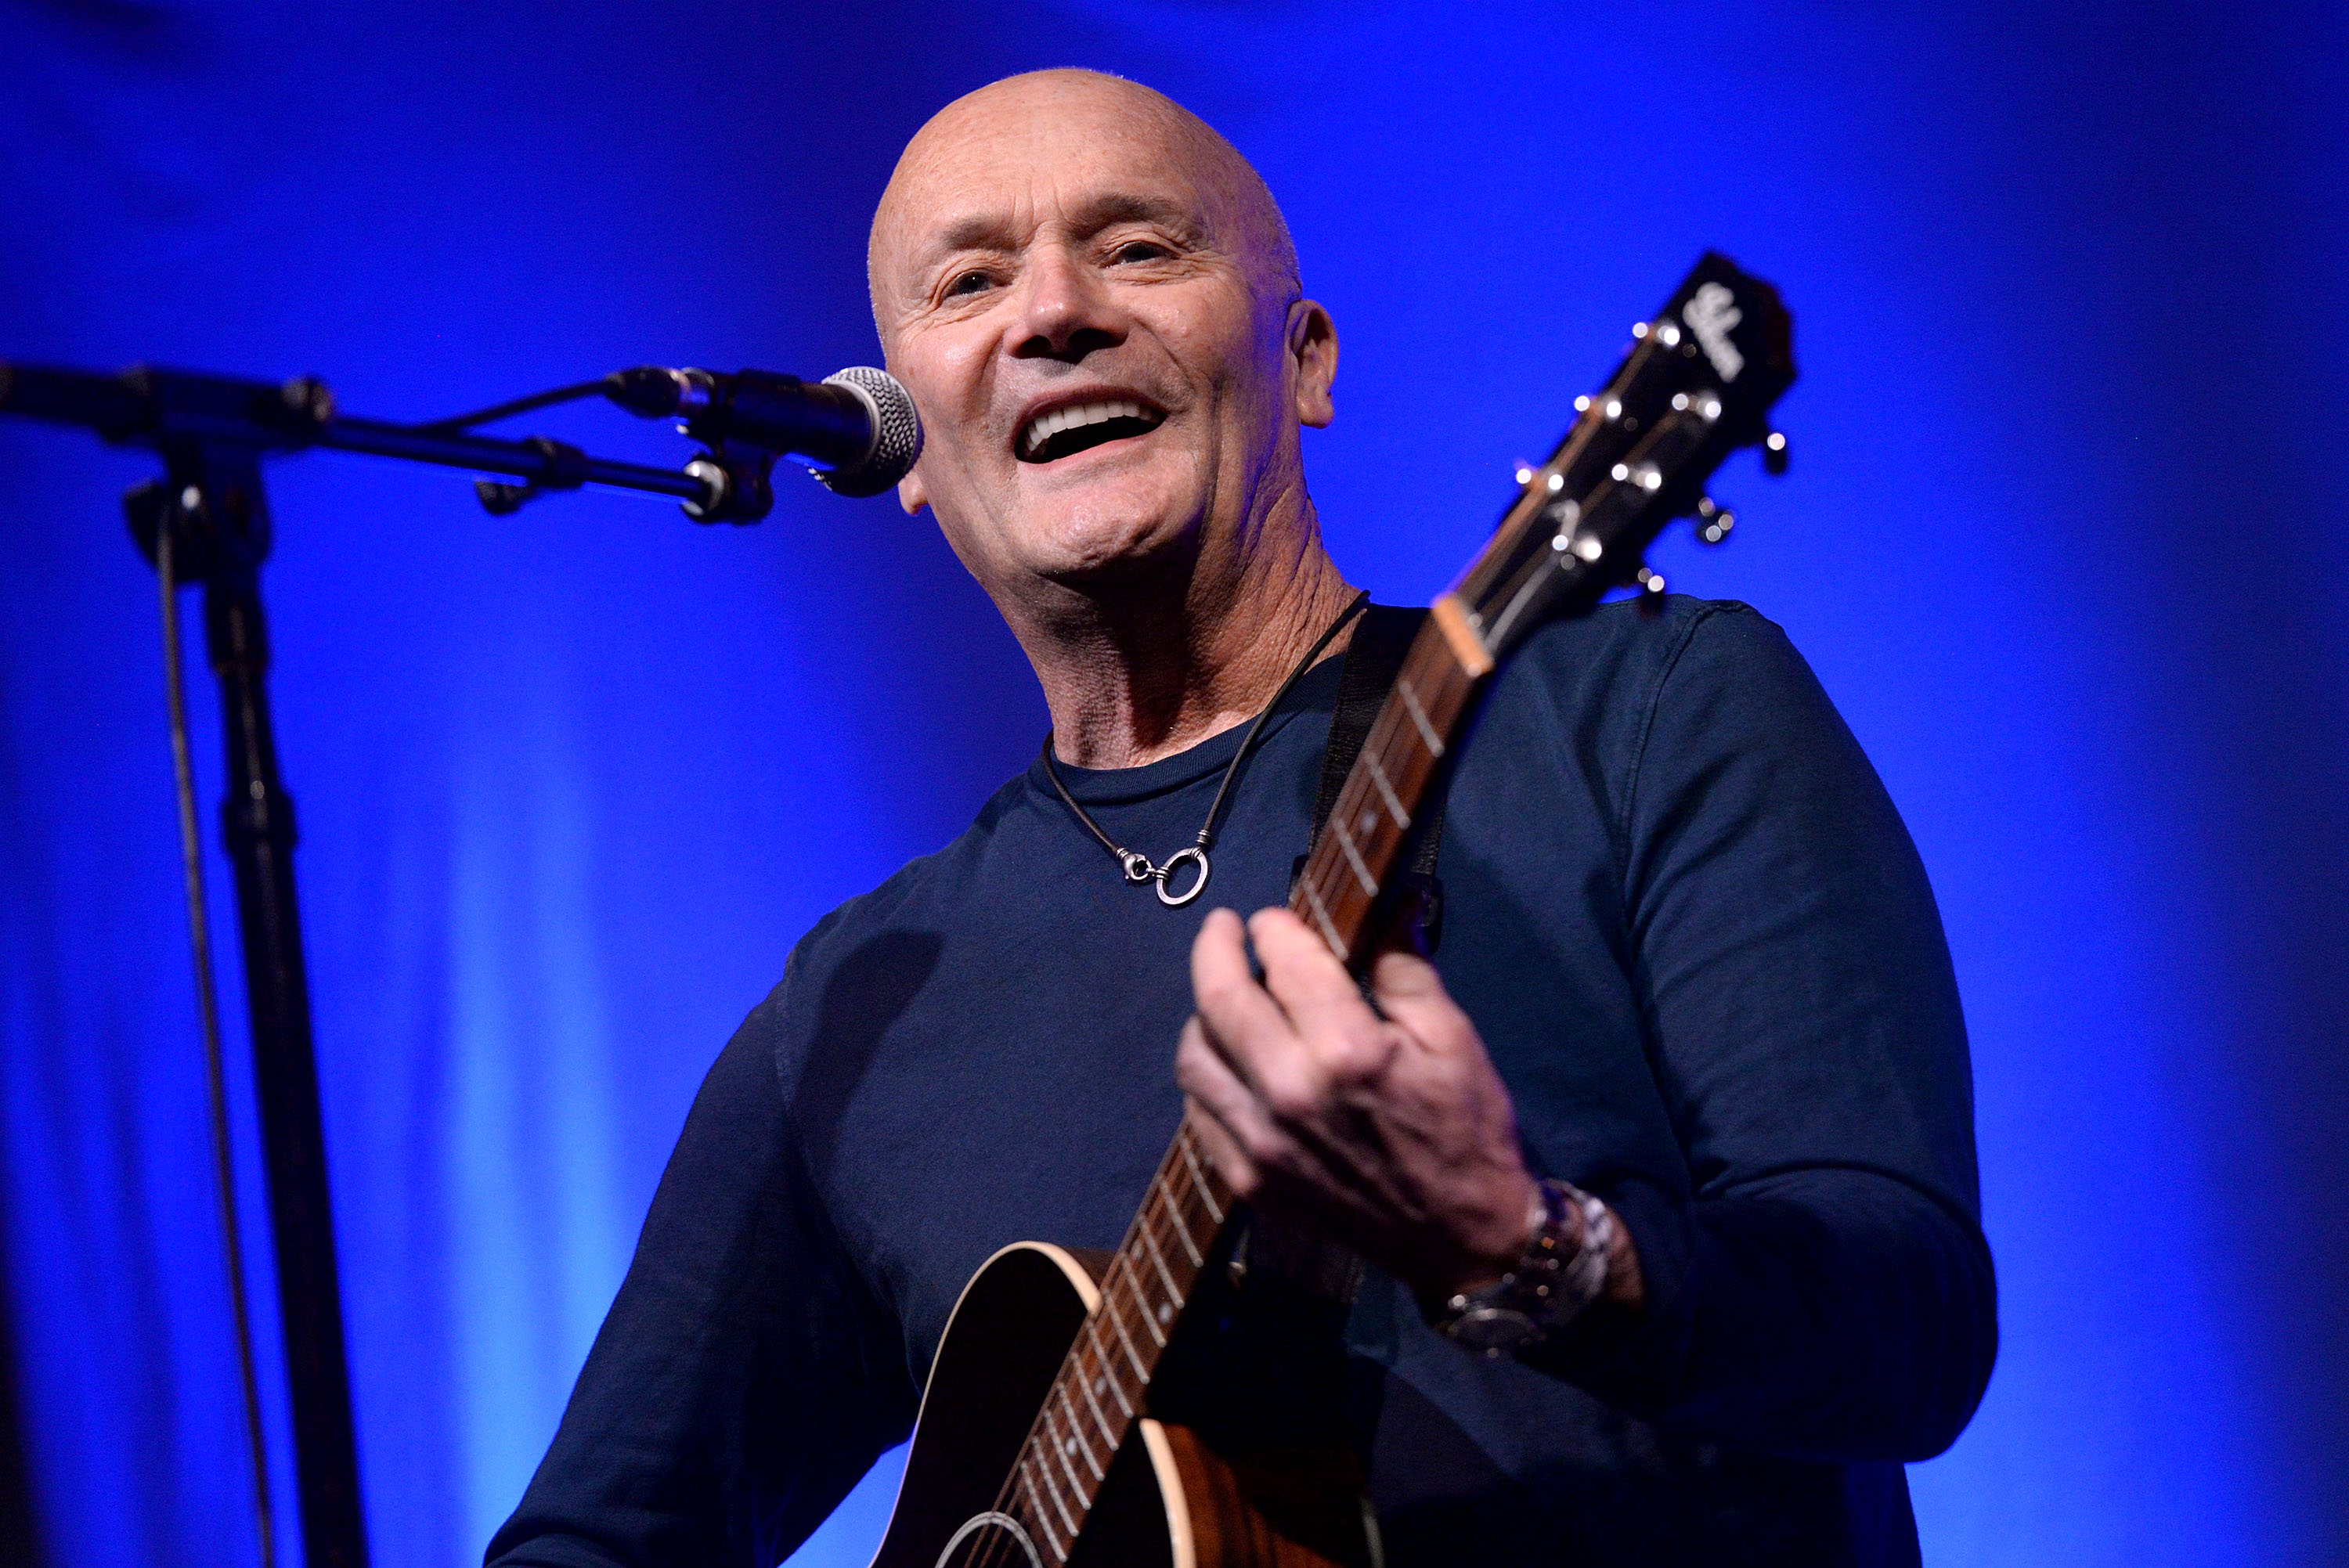 'The Office' actor and musician Creed Bratton performs onstage at the Regent Theater